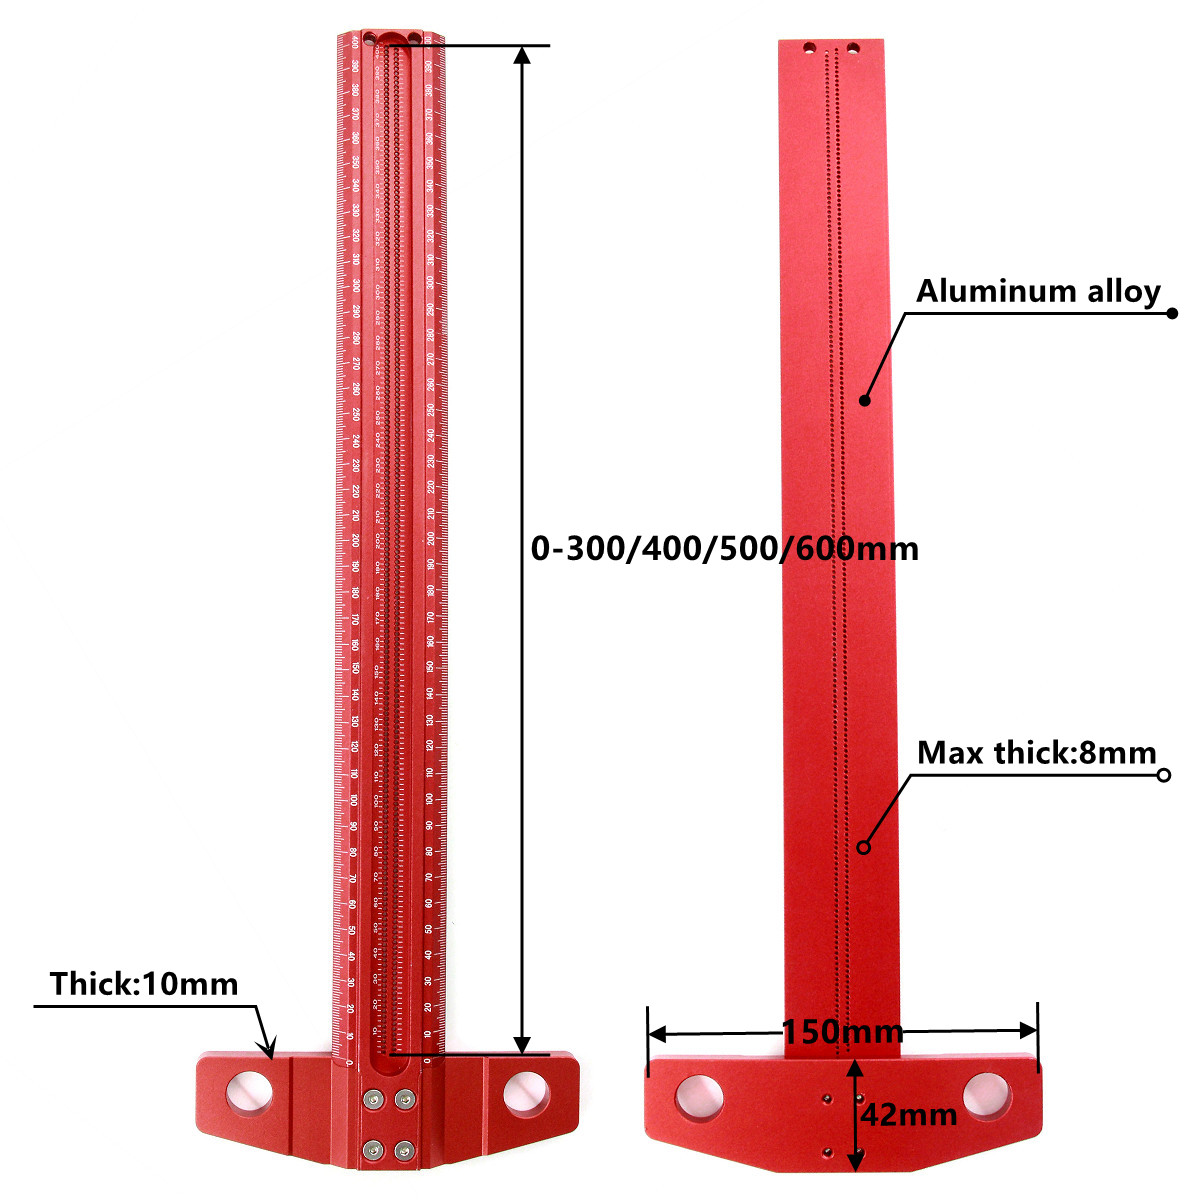 Drillpro-300400500600mm-Woodworking-Line-Scriber-T-type-Ruler-1mm-Hole-Crossed-Ruler-Aluminum-Alloy--1772764-6